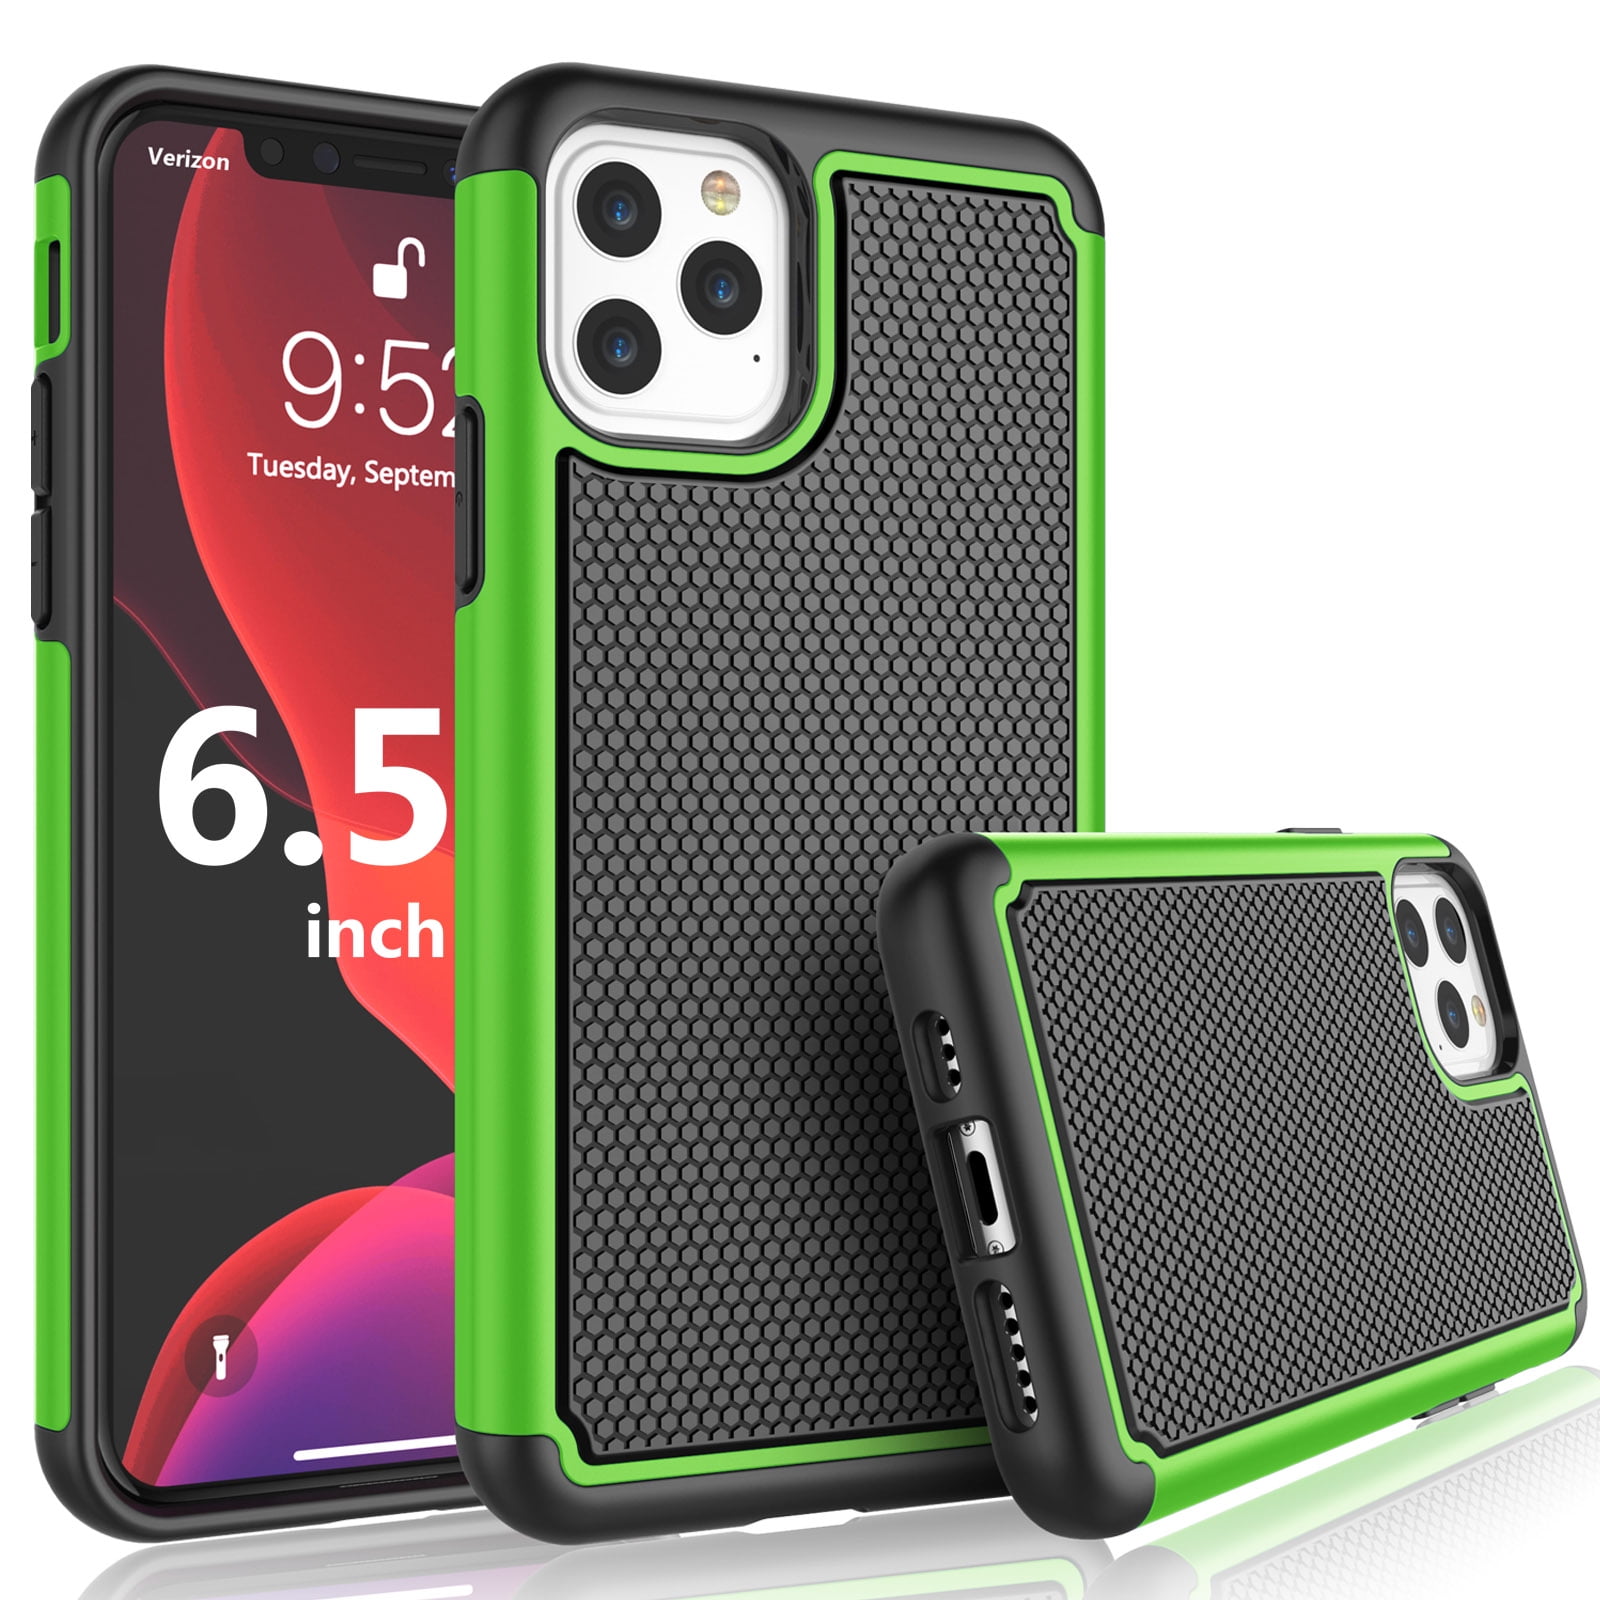 tekcoo-cases-for-2019-apple-iphone-11-pro-max-6-5-iphone-11-6-1